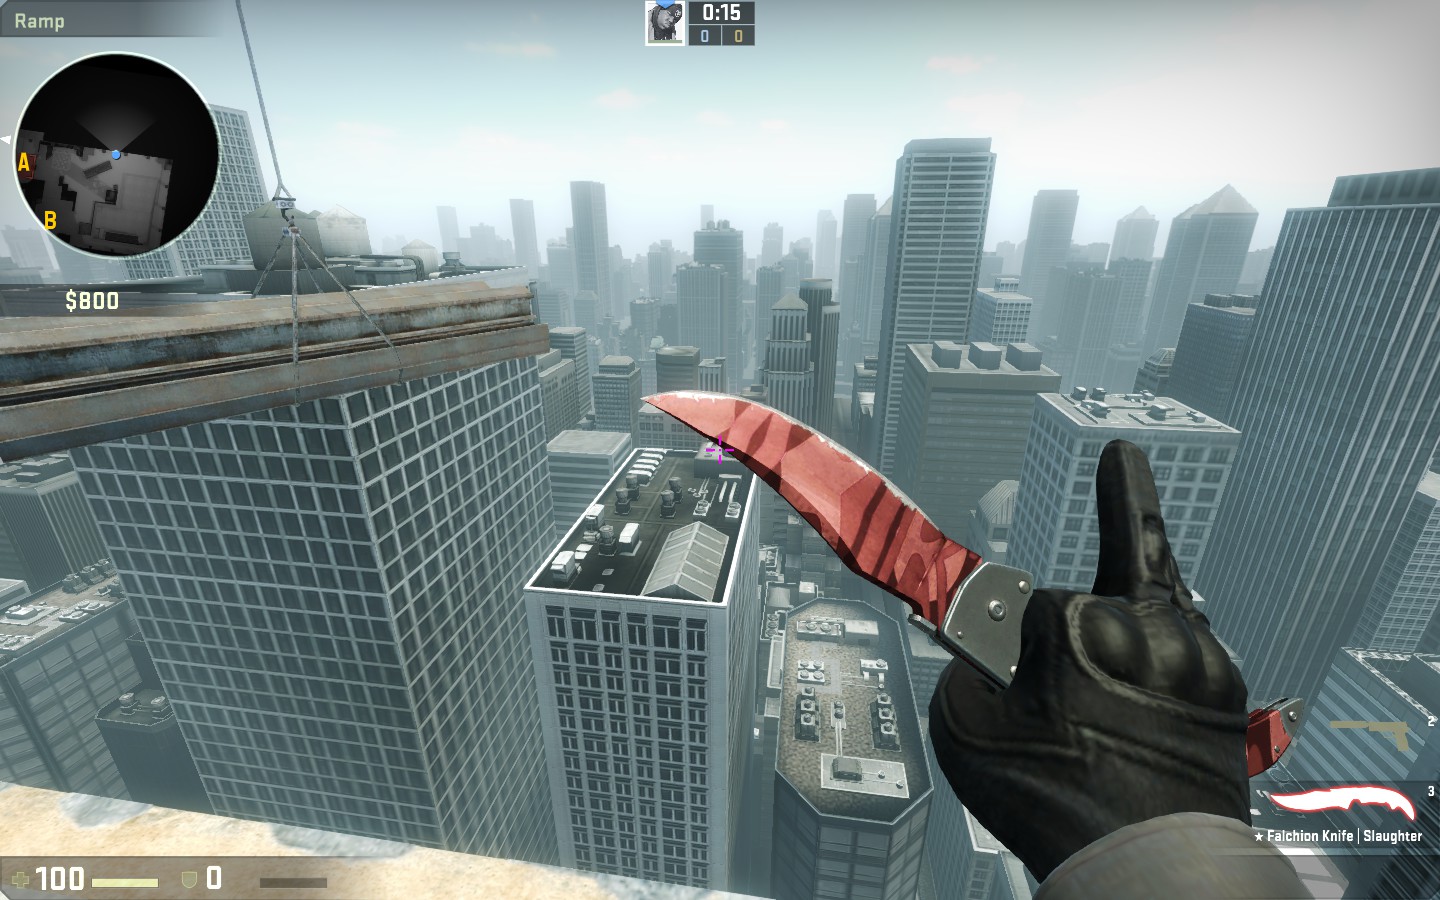 Falchion Knife Slaughter Mw